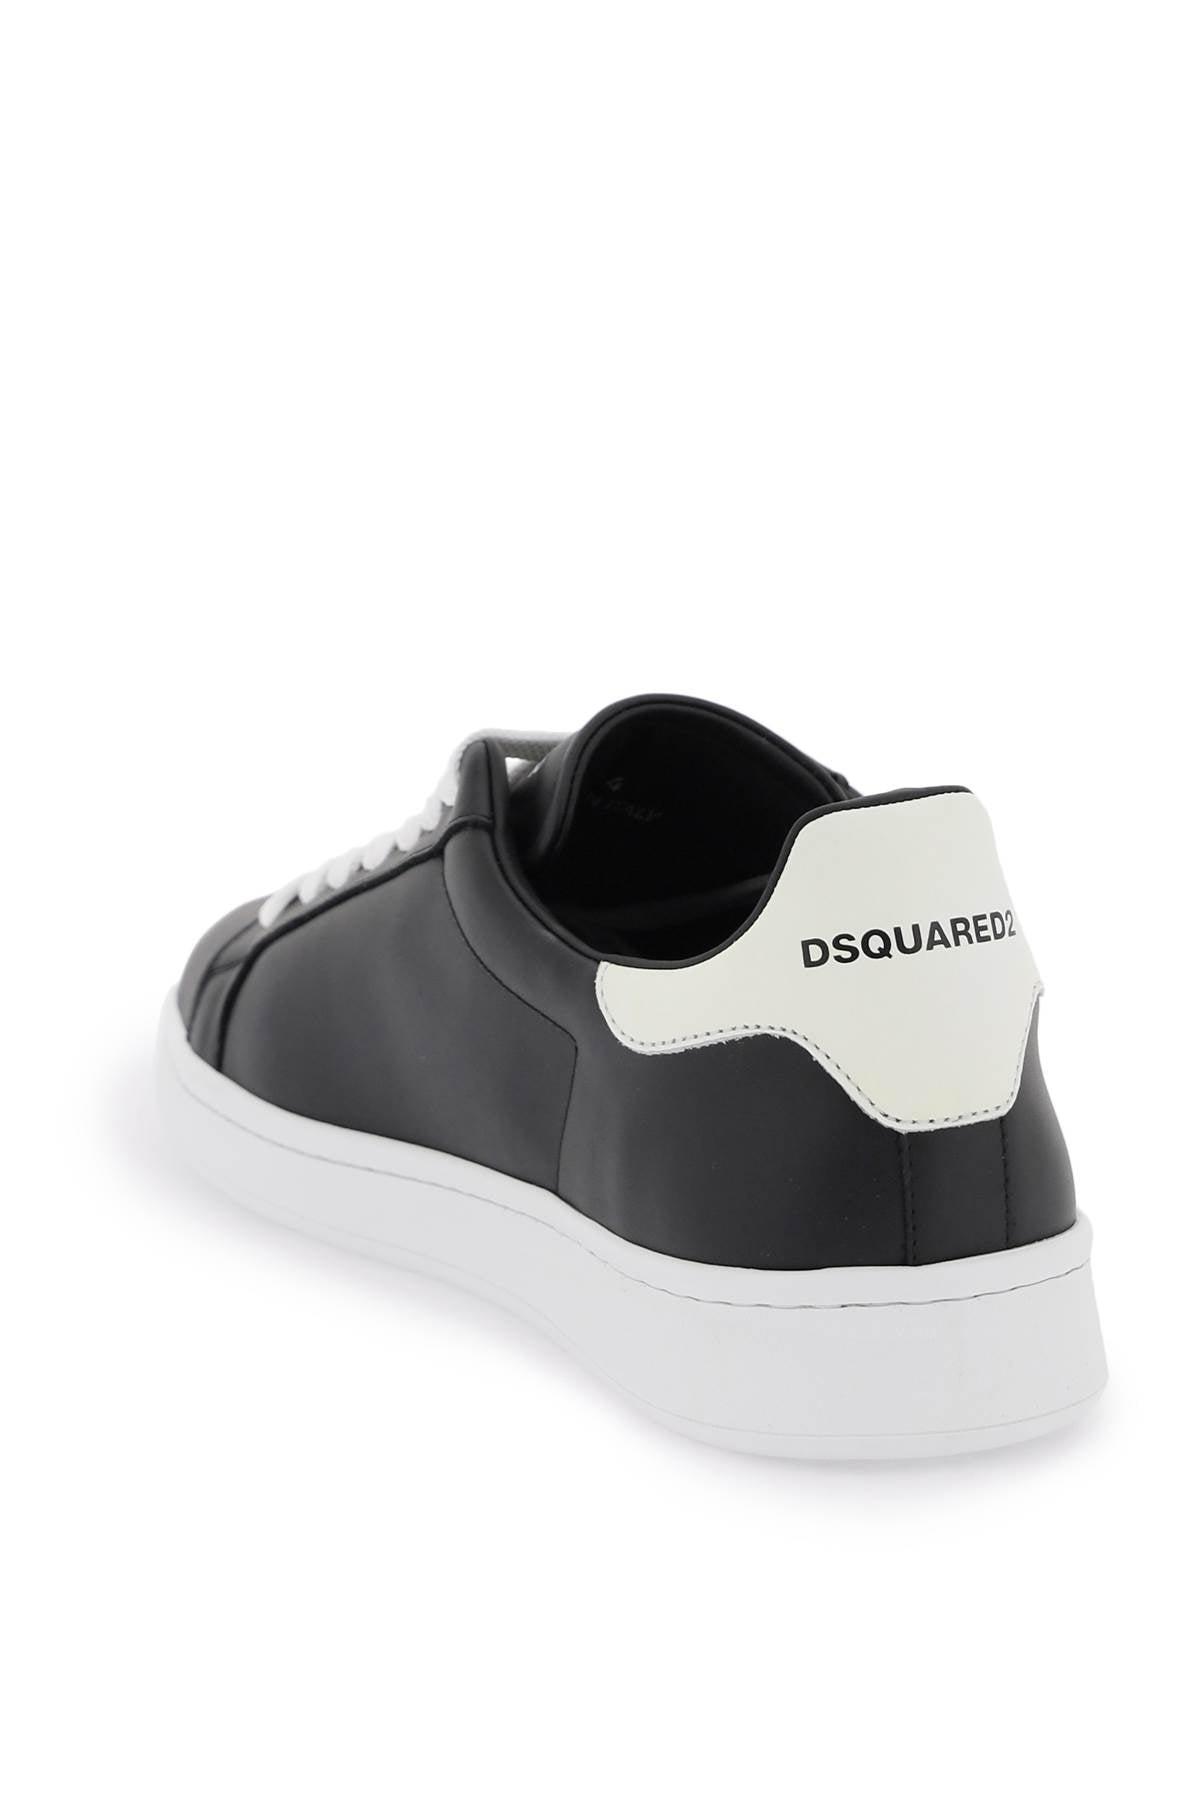 DSquared² 'boxer' Sneakers in White for Men | Lyst